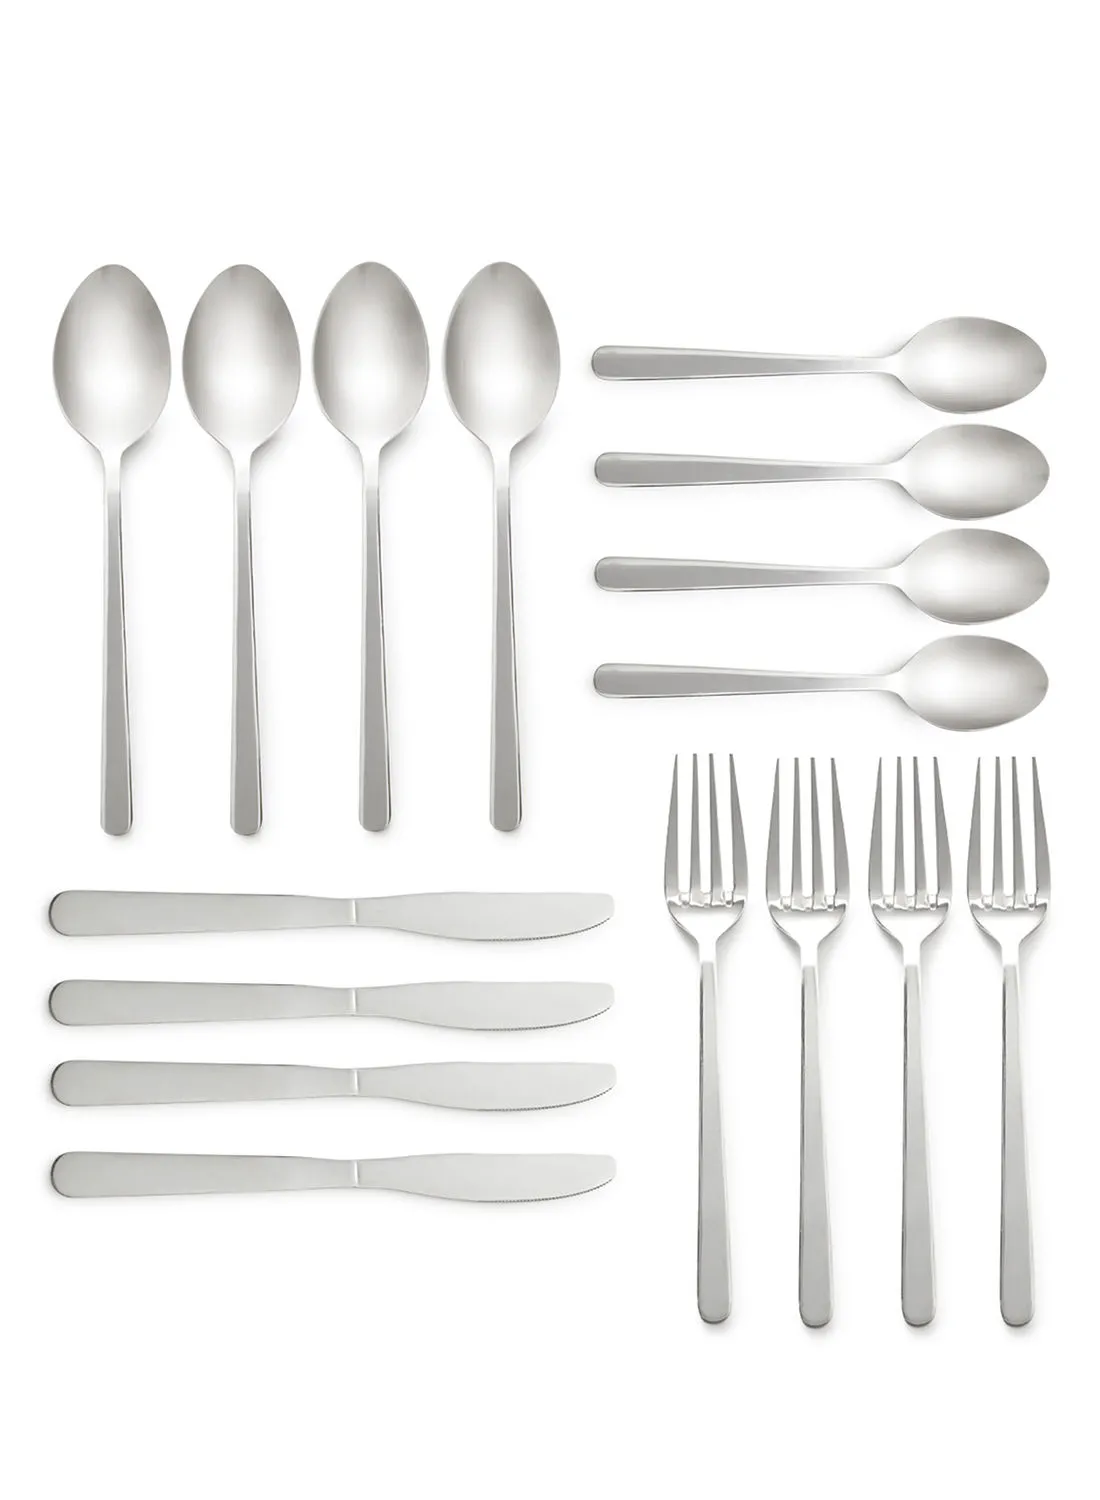 noon east 16 Piece Cutlery Set - Made Of Stainless Steel - Silverware Flatware - Spoons And Forks Set, Spoon Set - Table Spoons, Tea Spoons, Forks, Knives - Serves 4 - Design Silver Sail